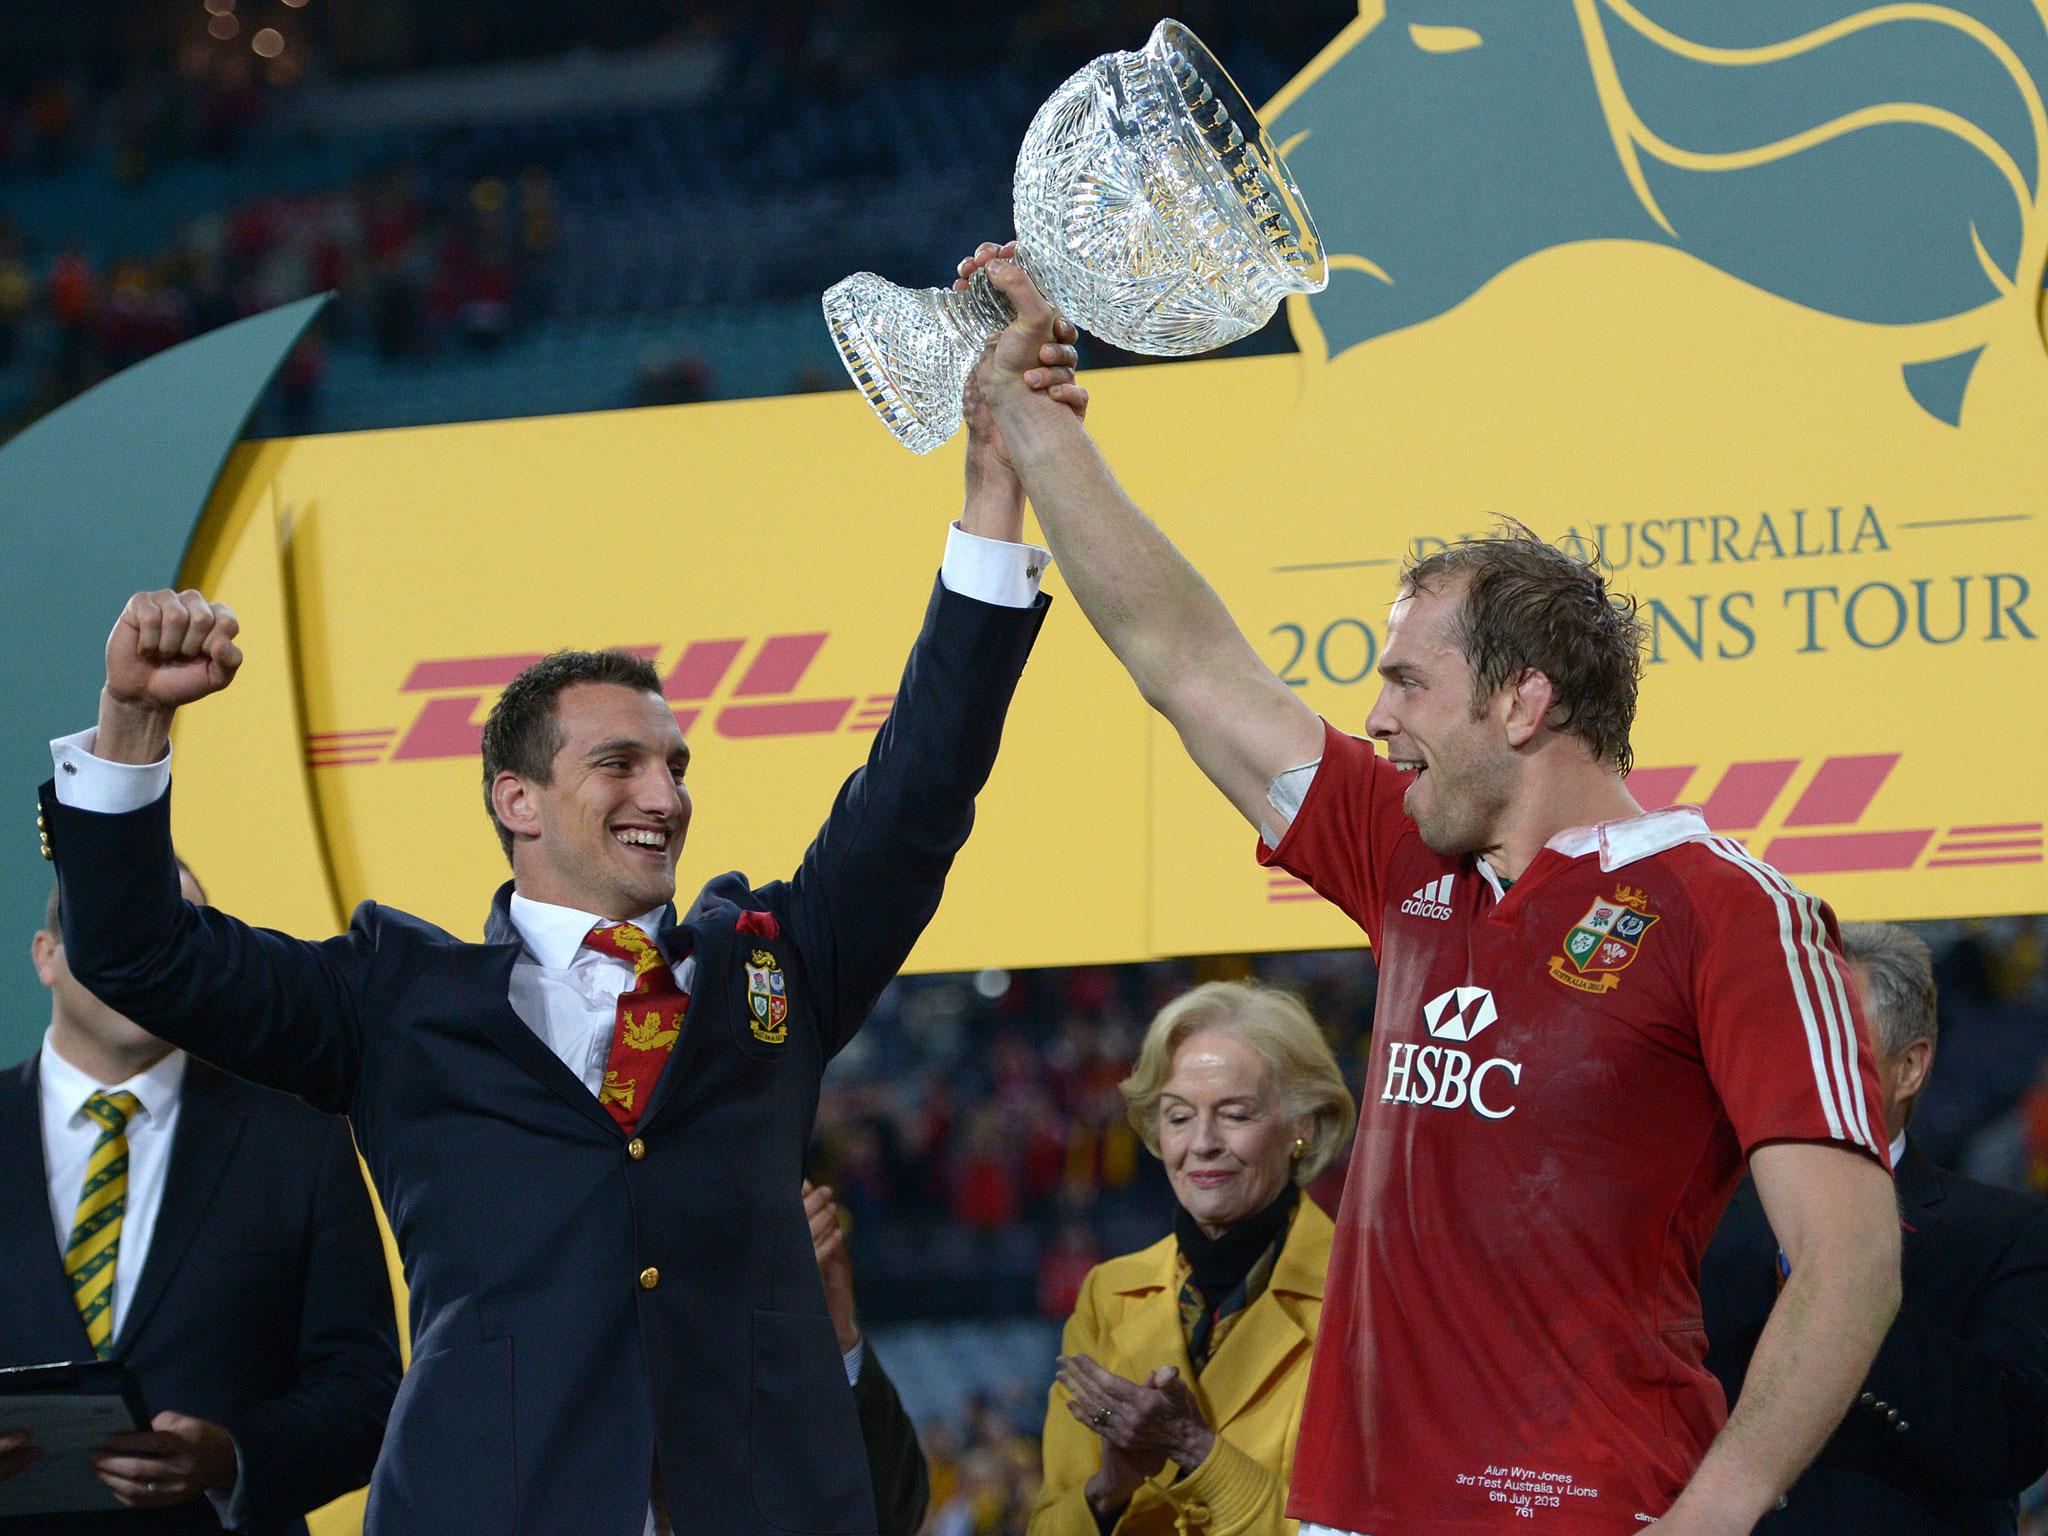 Sam Warburton and Alun Wyn Jones together after the successful British and Irish Lions tour of Australia